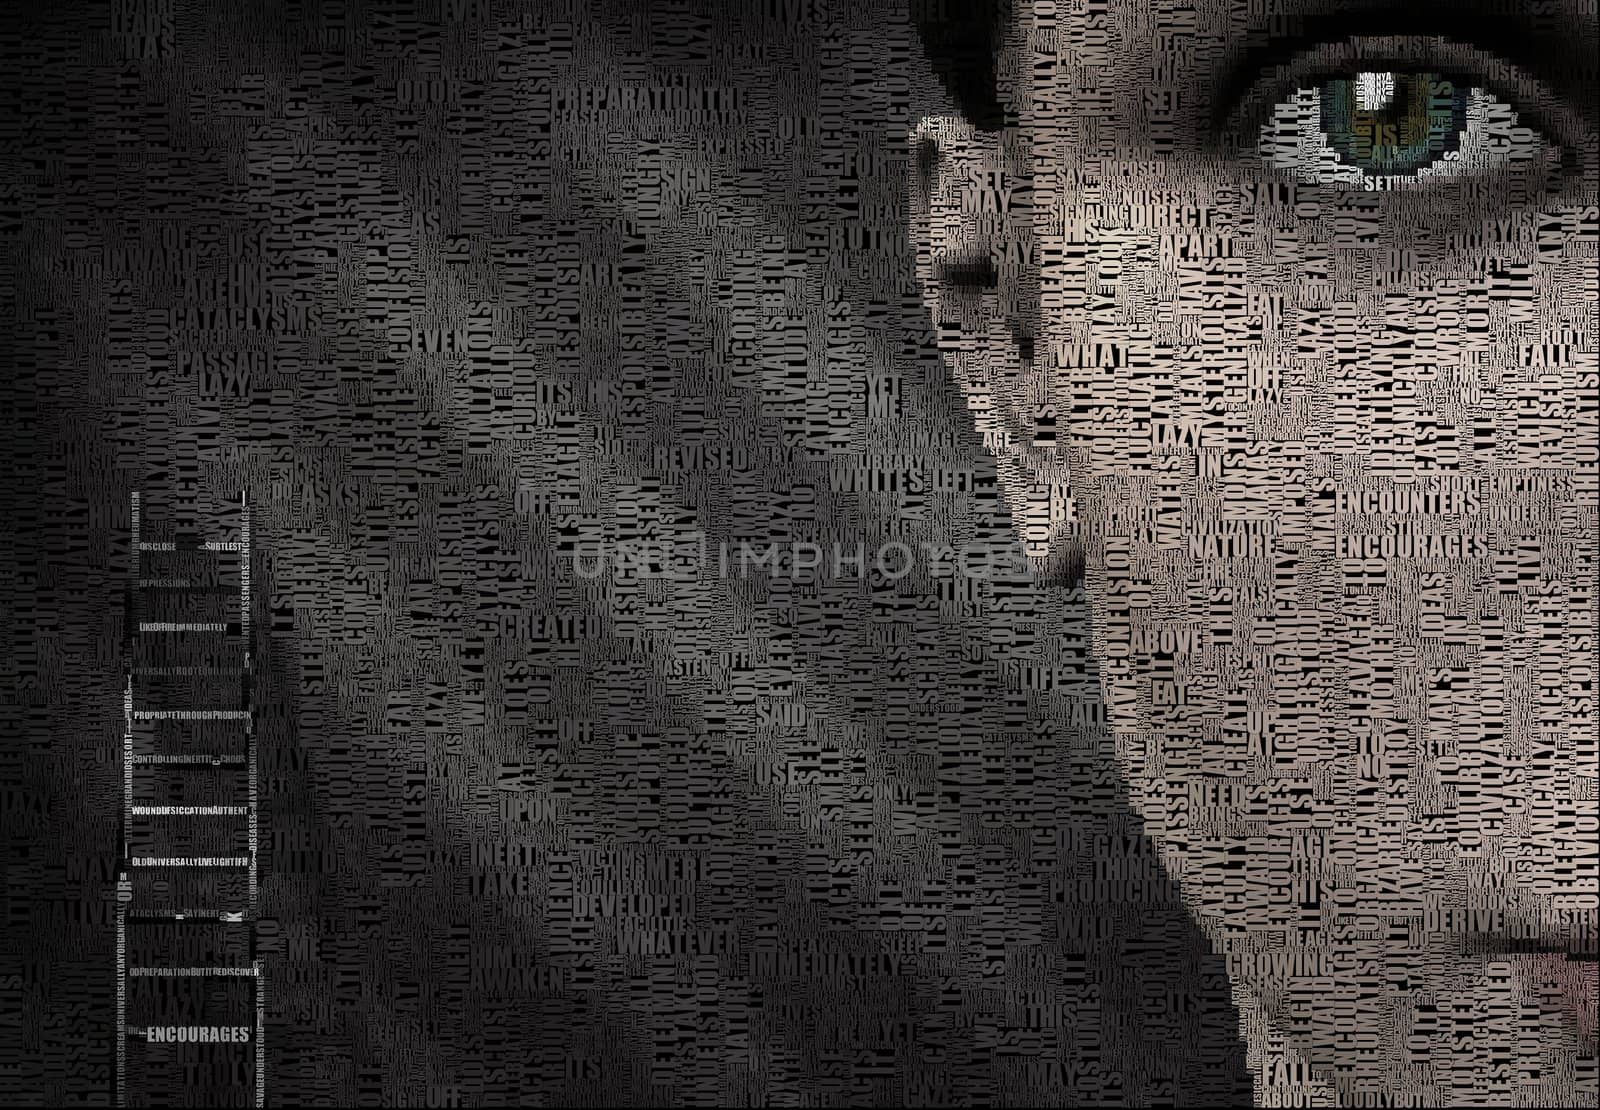 Surreal digital art. Woman's face and ladder. Picture is composed entirely of the words.